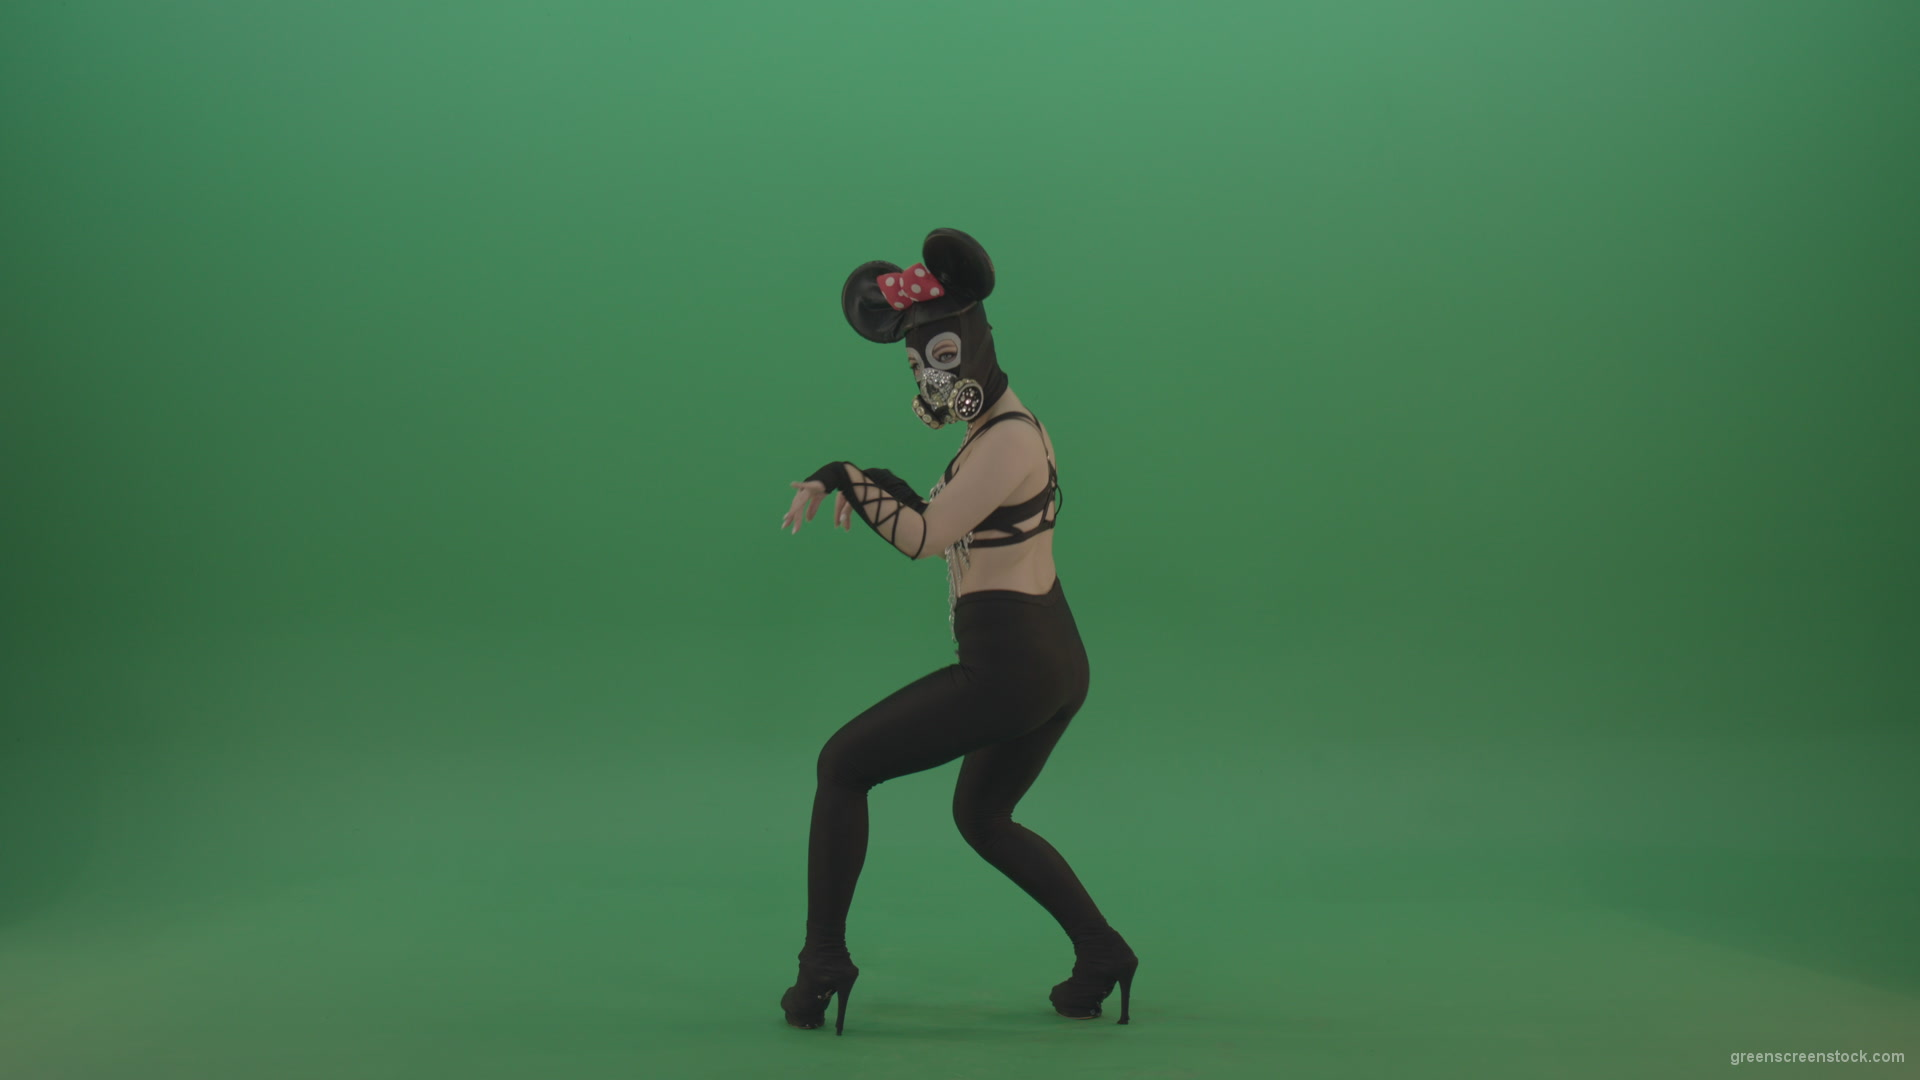 Mouse-Girl-in-mask-dancing-go-go-shaking-ass-and-posing-on-green-screen_002 Green Screen Stock